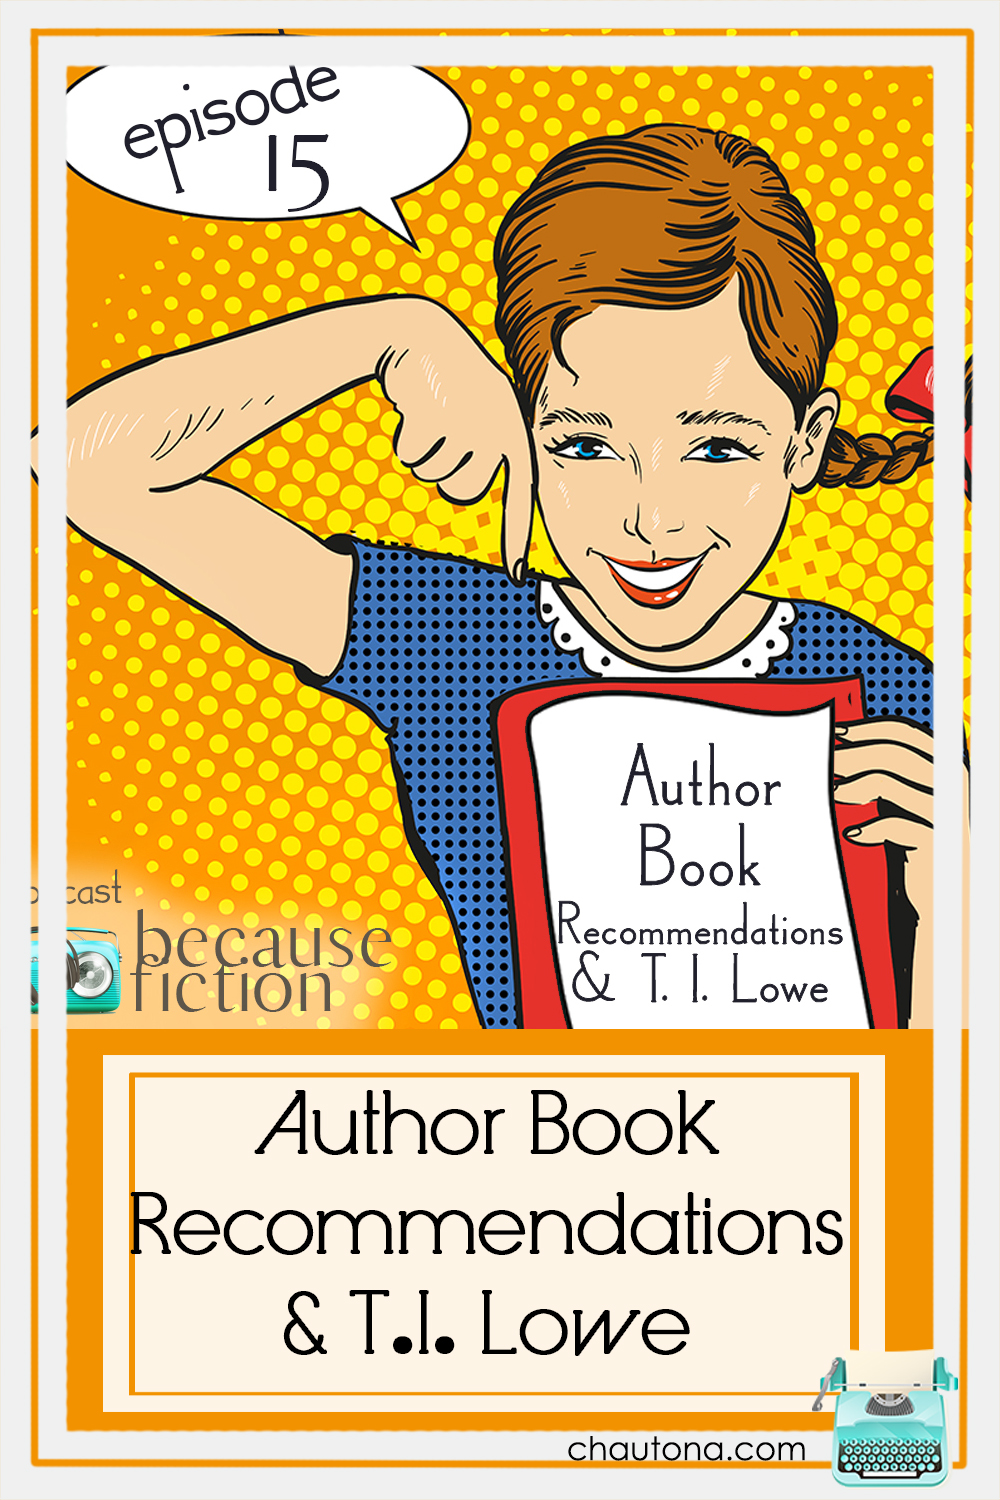 Author Book Recommendations & T.I. Lowe